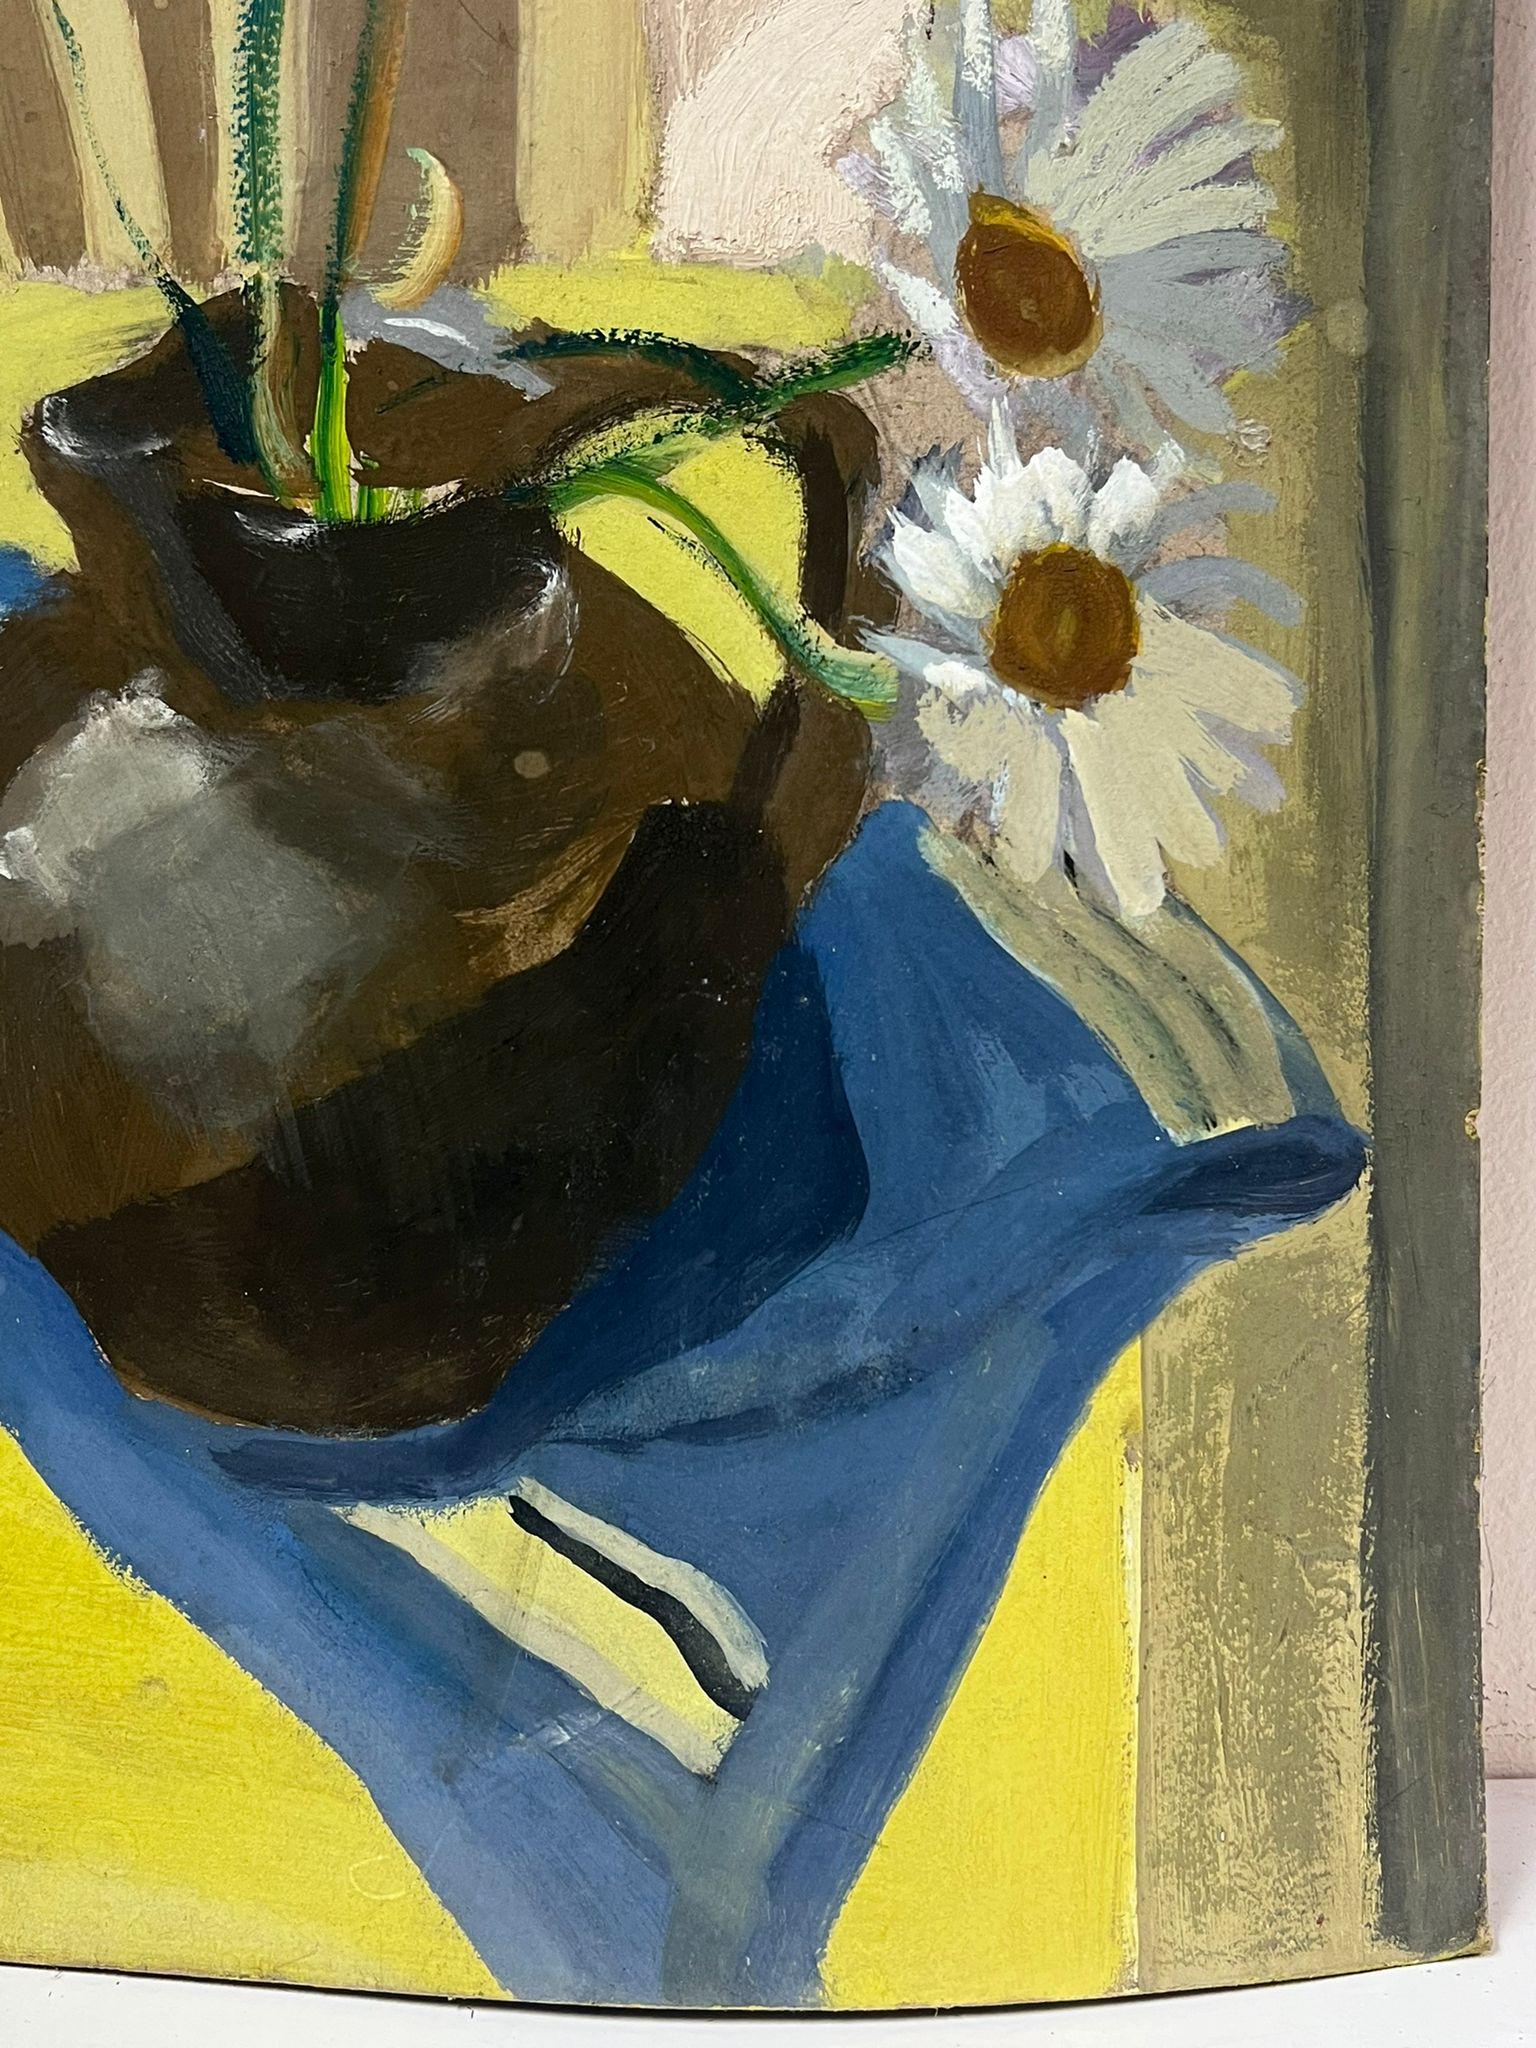 Daisies
signed by Y. Blanchon, French 1950's Impressionist 
gouache on an old artist note pad, unframed
painting: 17 x 13 inches
provenance: from a large private collection of this artists work in Northern France
condition: original, good and sound